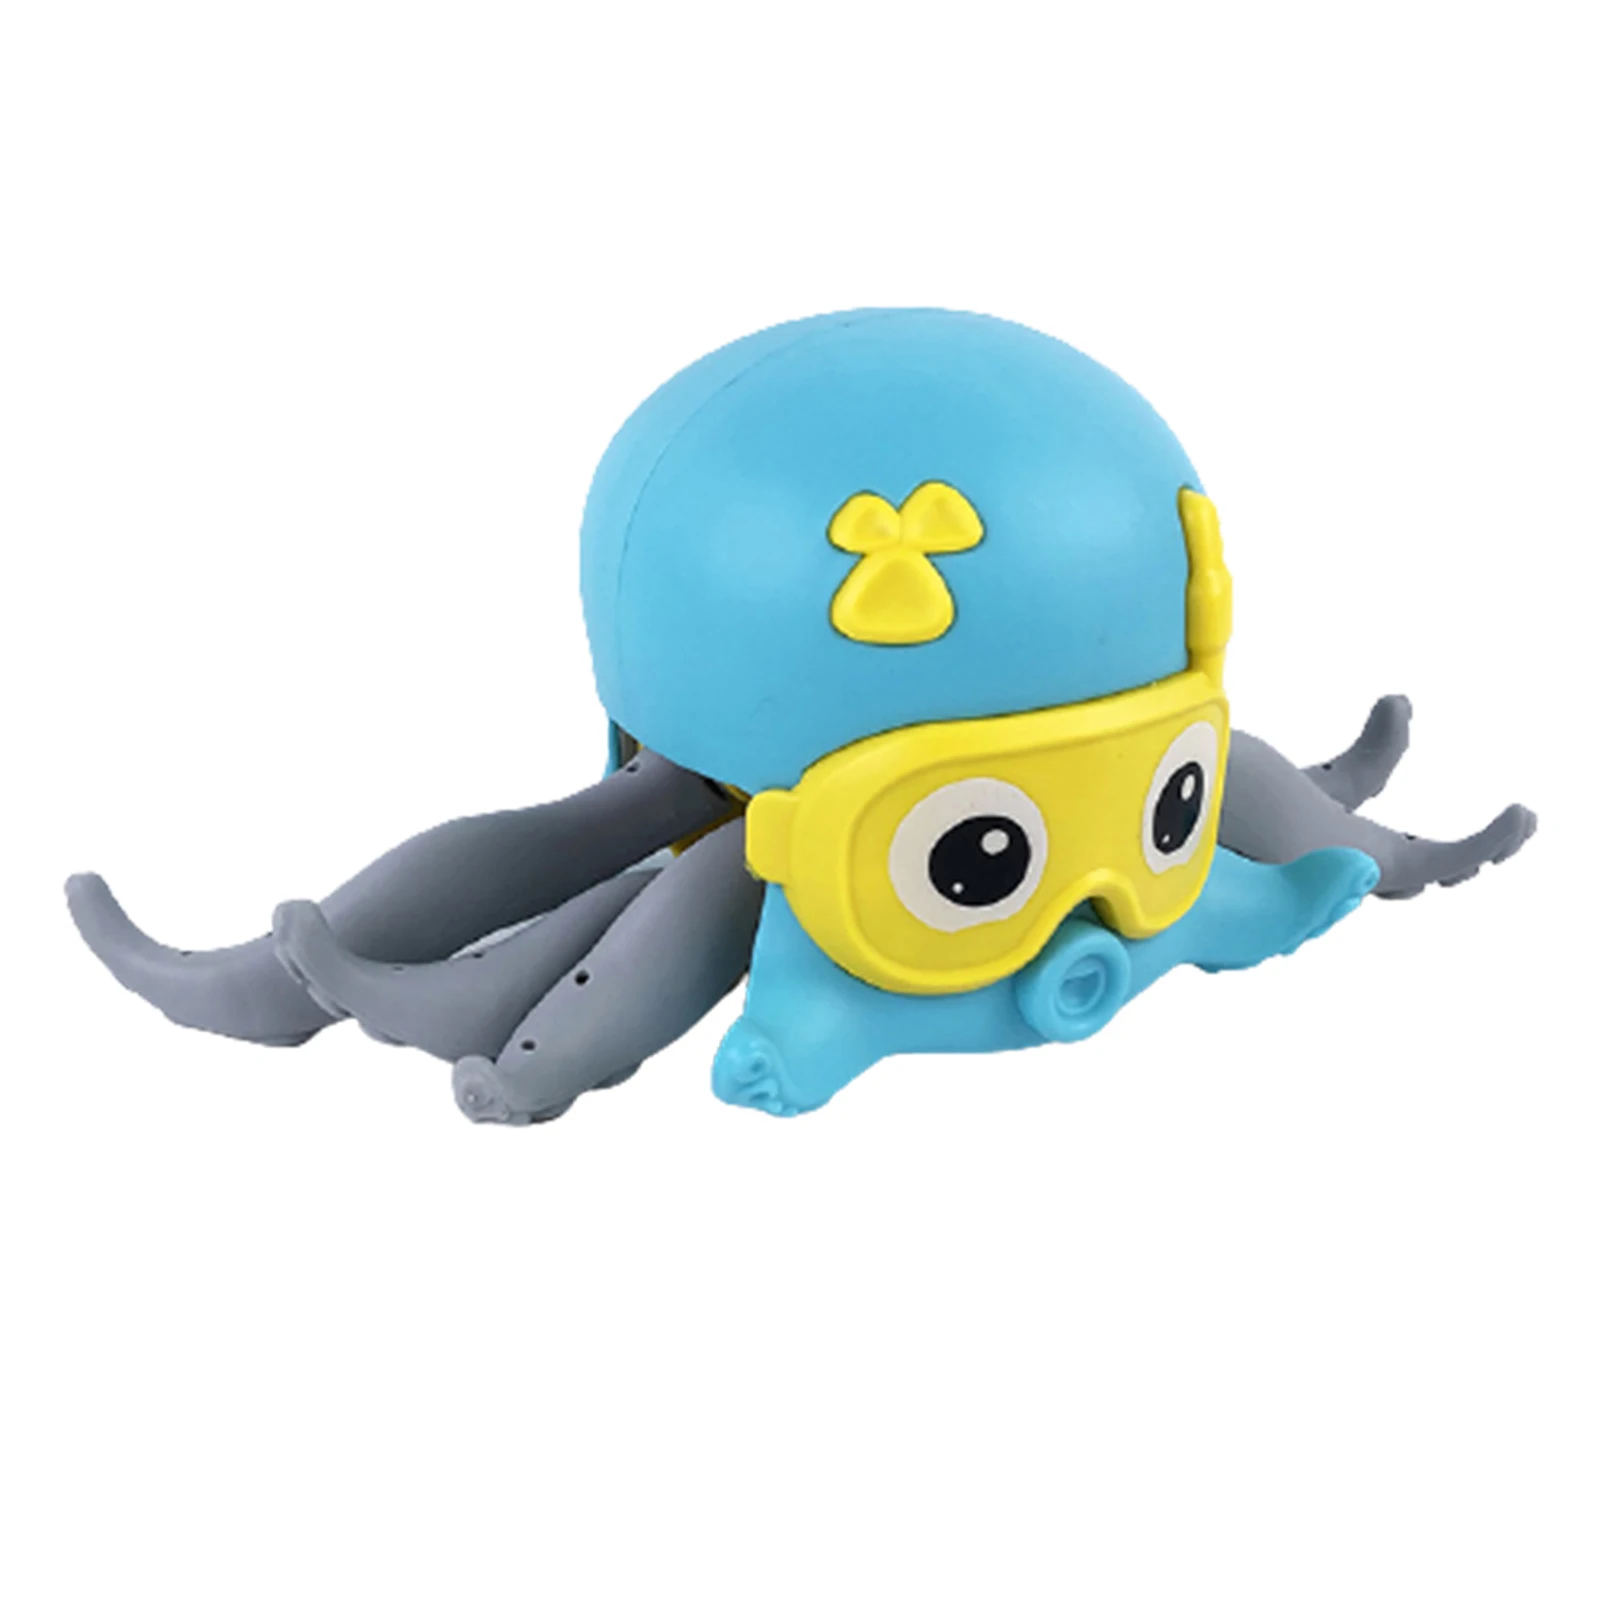 

Baby Bath Toys Octopus Toy Wind-Up Bathtub Baby Bath Toys Water Pool Toys for Infant Toddlers Kids Boys Girls